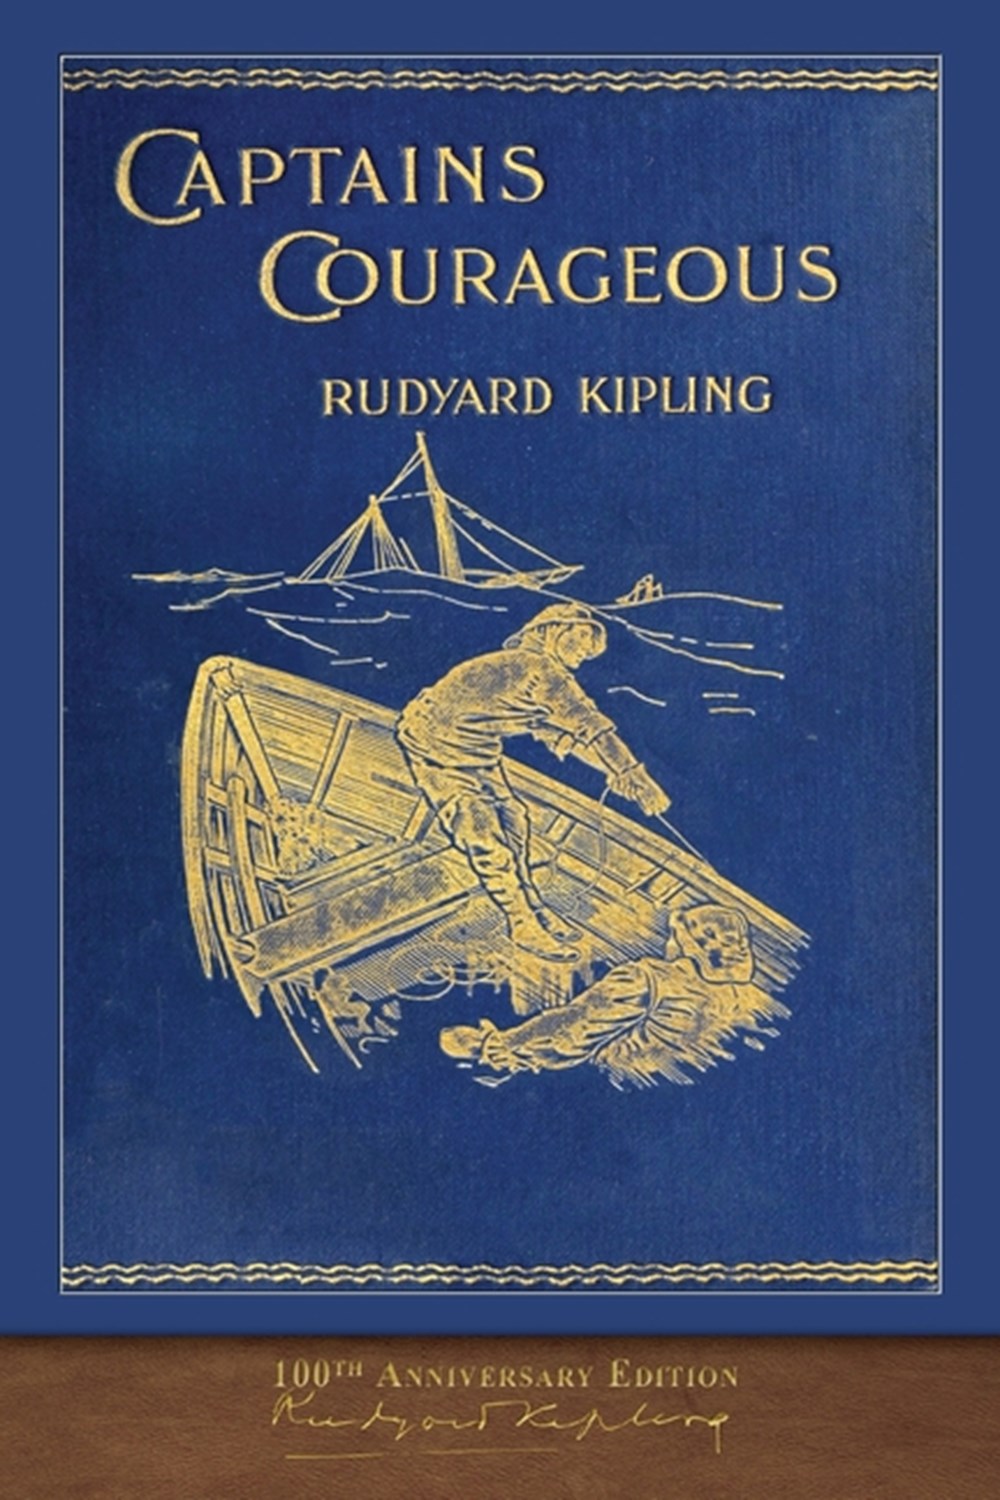 Captains Courageous (100th Anniversary Edition) Illustrated First Edition